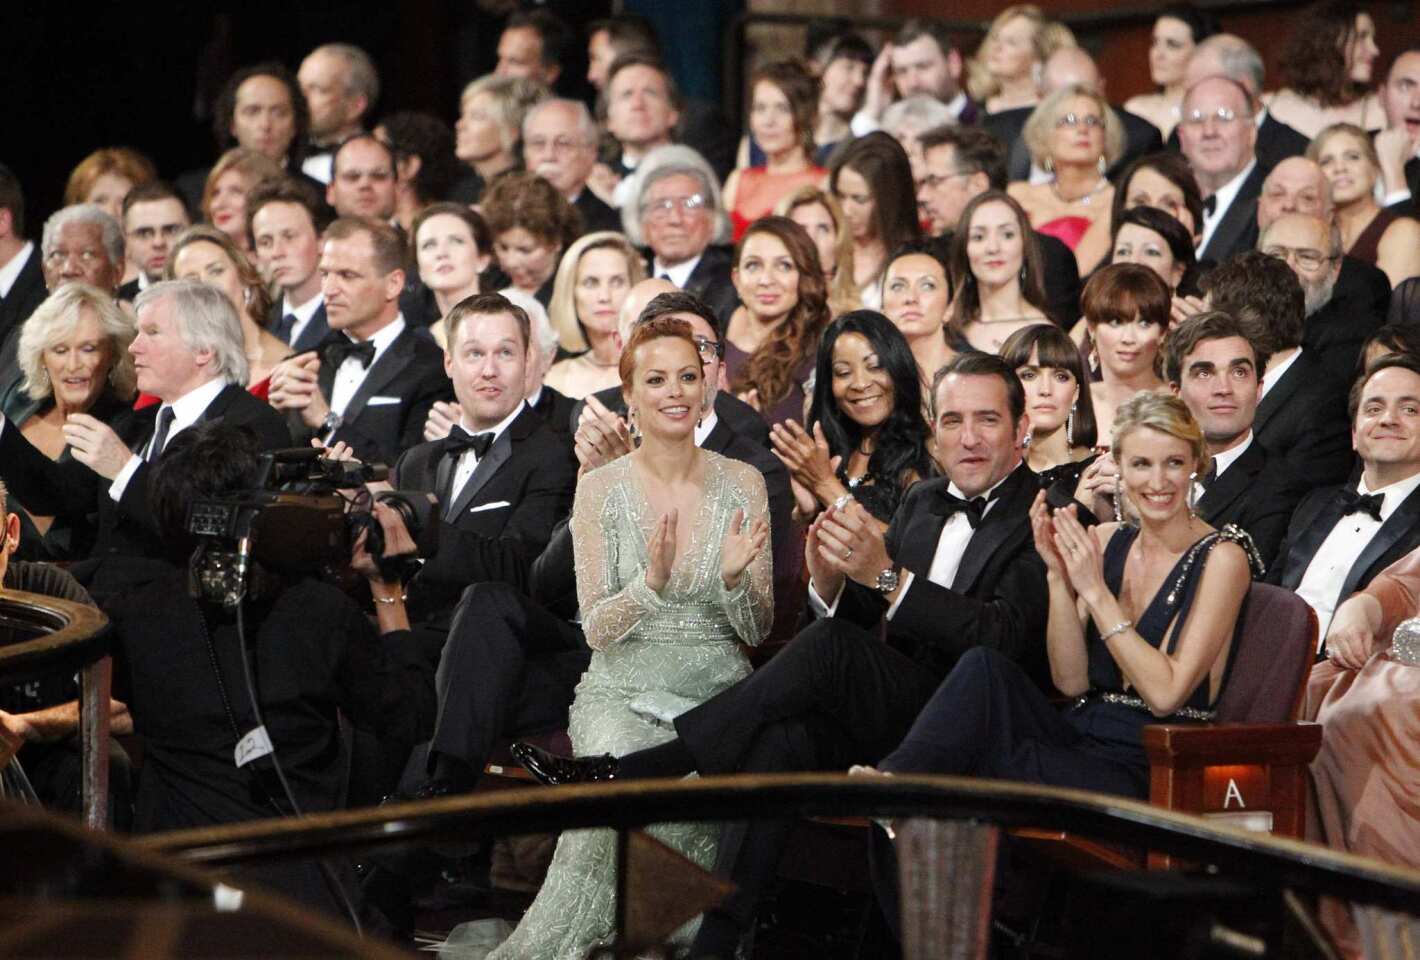 Berenice Bejo and Jean Dujardin are spotted in their seats at the 2012 Academy Awards in Hollywood.